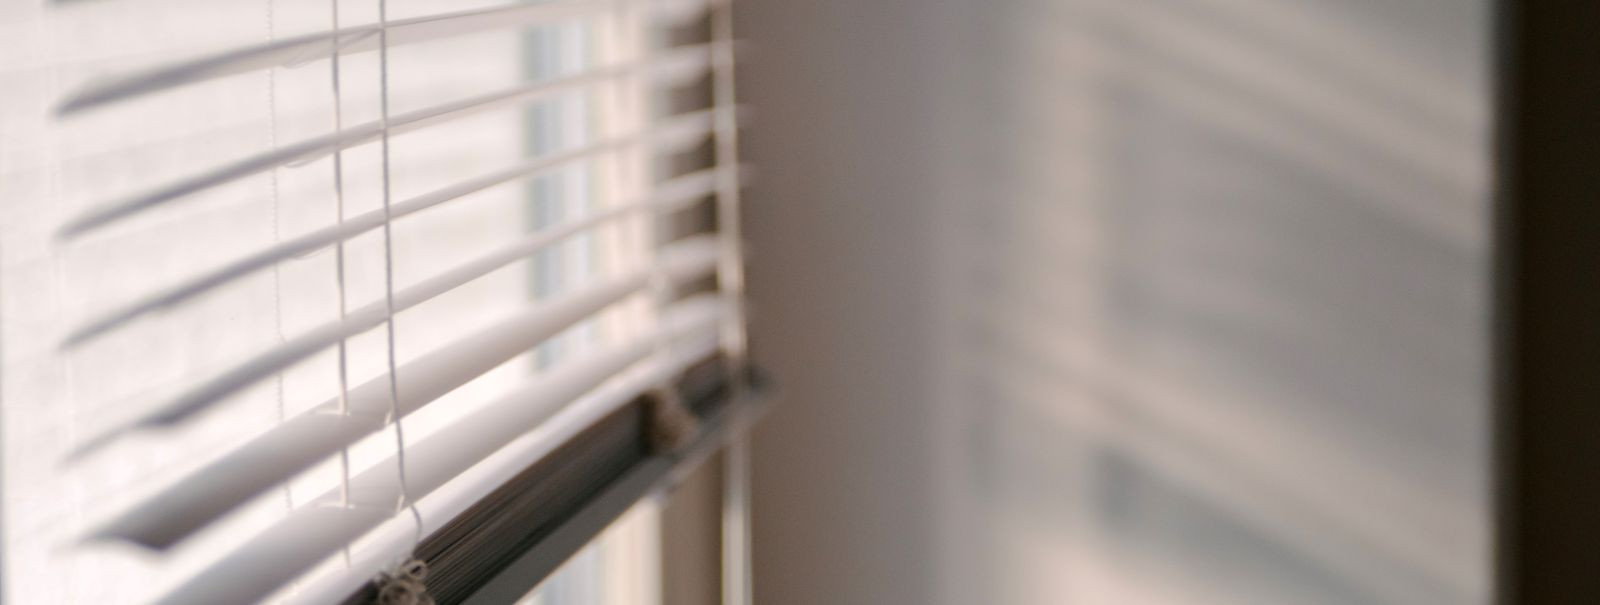 Blinds are a popular choice for window treatments, offering both aesthetic appeal and functionality. However, like any home accessory, they require regular main